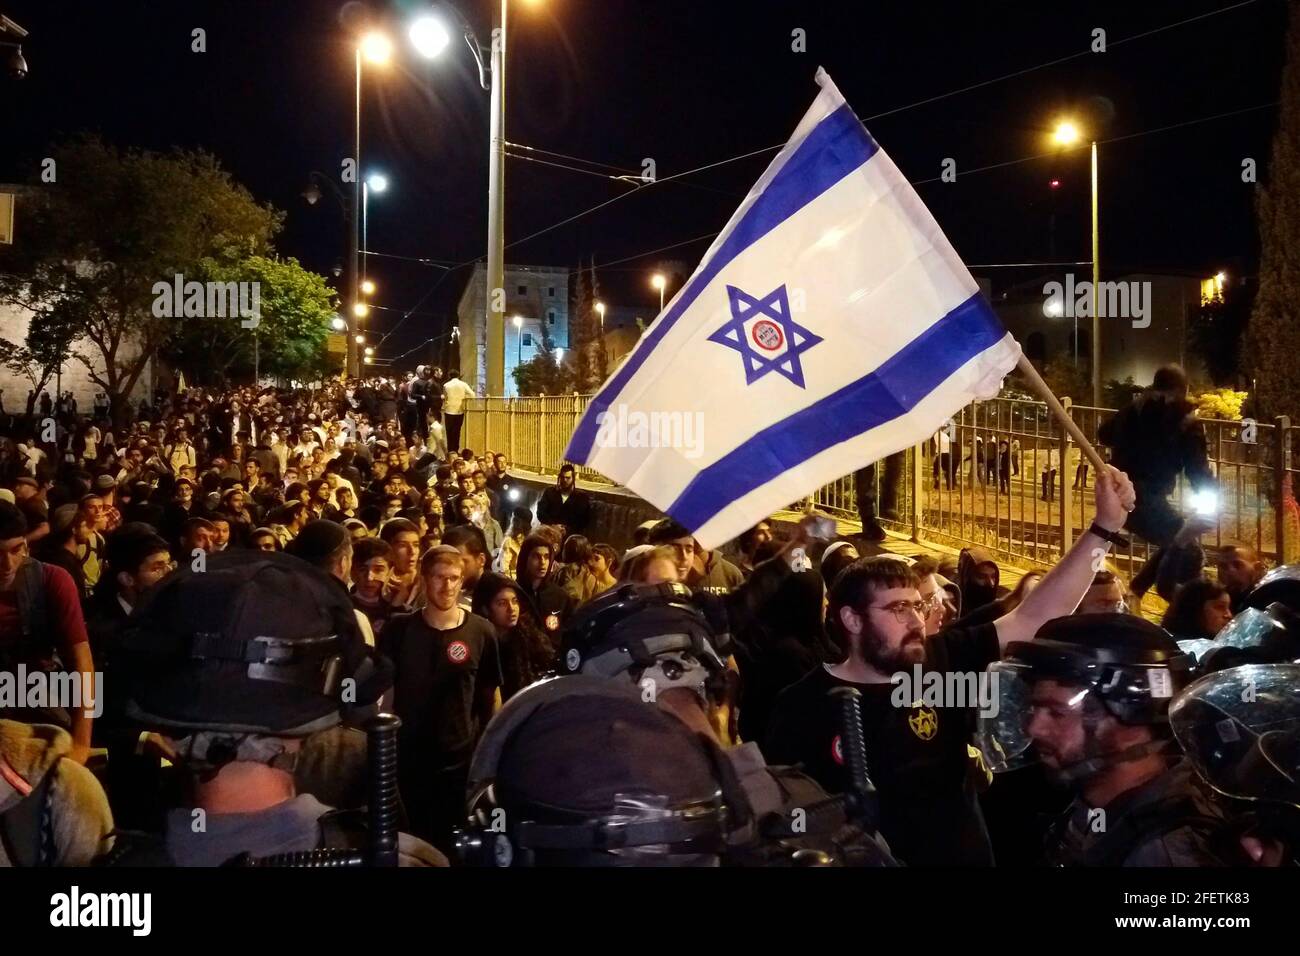 JERUSALEM, ISRAEL - APRIL 22: Israeli police officers confront far-right activists during a rally of Jewish Supremacists near the Old City on April 22, 2021, in Jerusalem, Israel. Hundreds of Jewish far-right activists marched from Jerusalem's Zion Square on Thursday's night toward the Old City in what the anti-assimilation group Lehava called a march to 'restore Jewish dignity.' The march comes after a week of violent assaults on Arab Israelis and Palestinian residents of central Jerusalem. Stock Photo